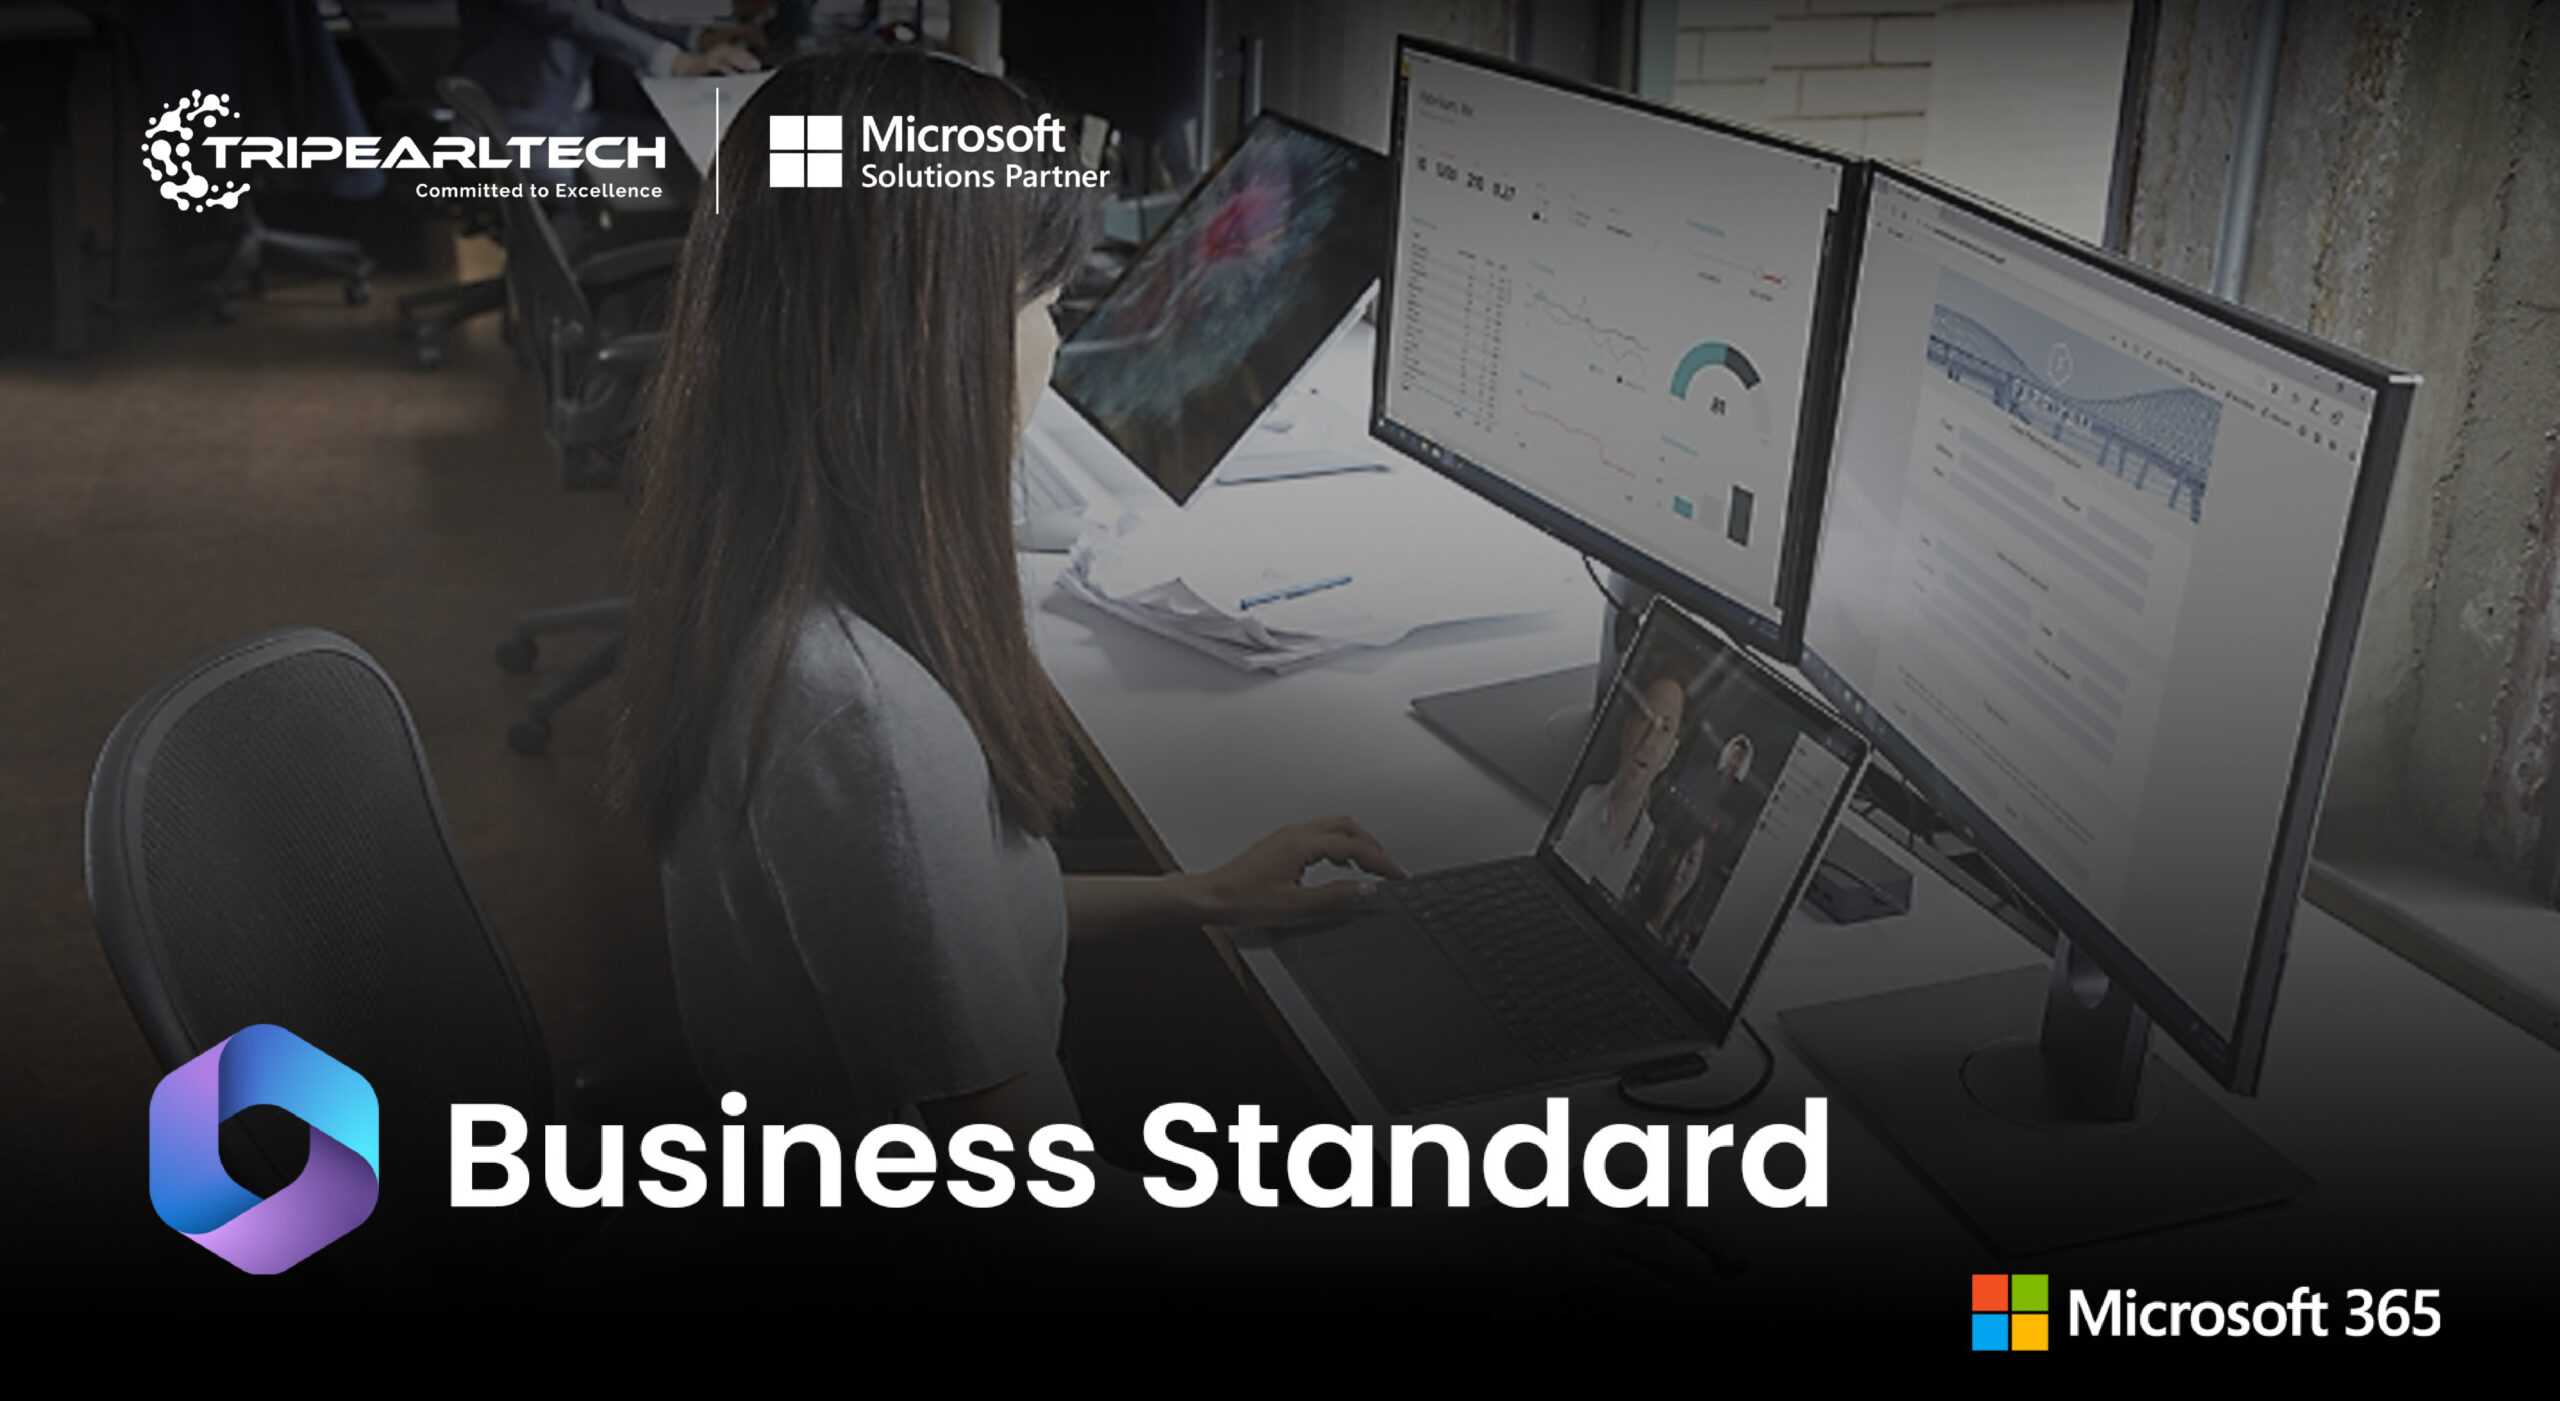 Microsoft 365 Business Standard for businesses